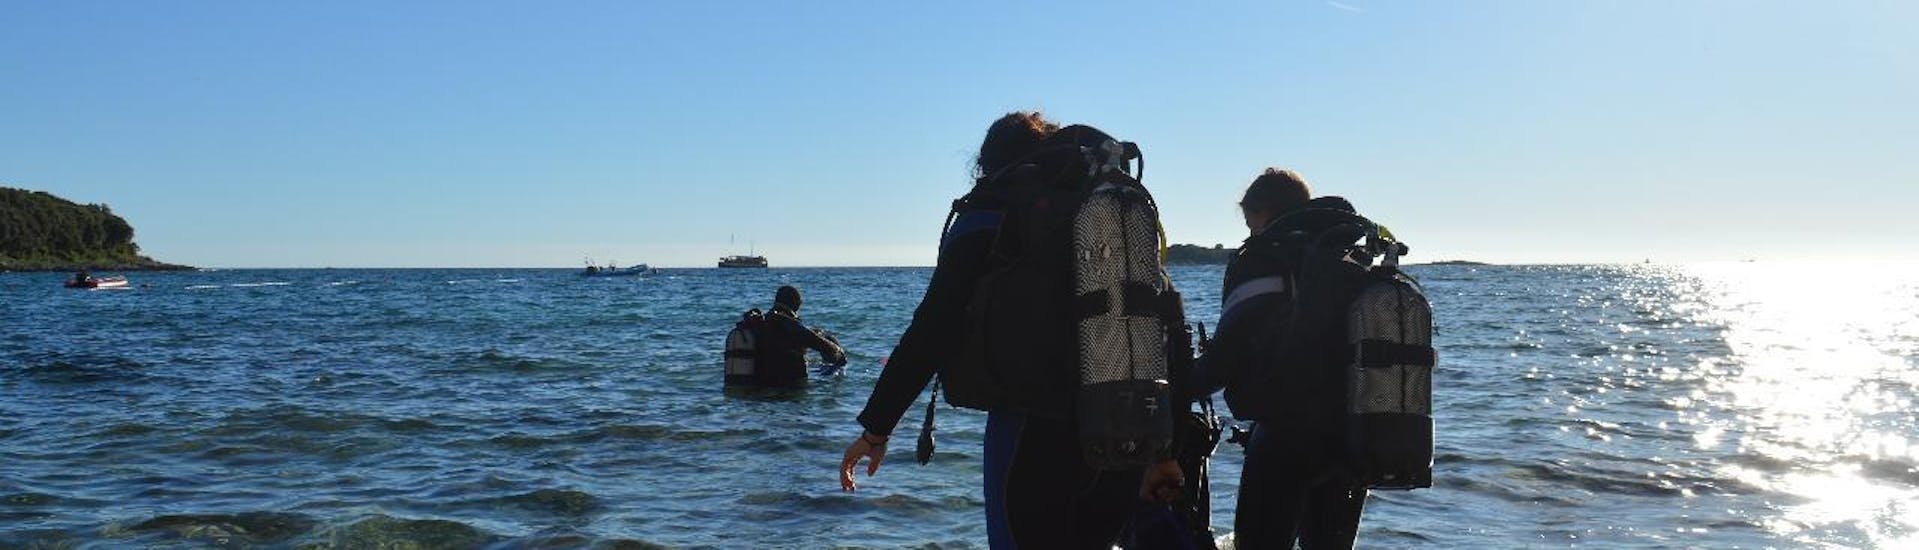 PADI Scuba Review Course in Vrsar for Certified Divers with Starfish Diving Center Vrsar - Hero image